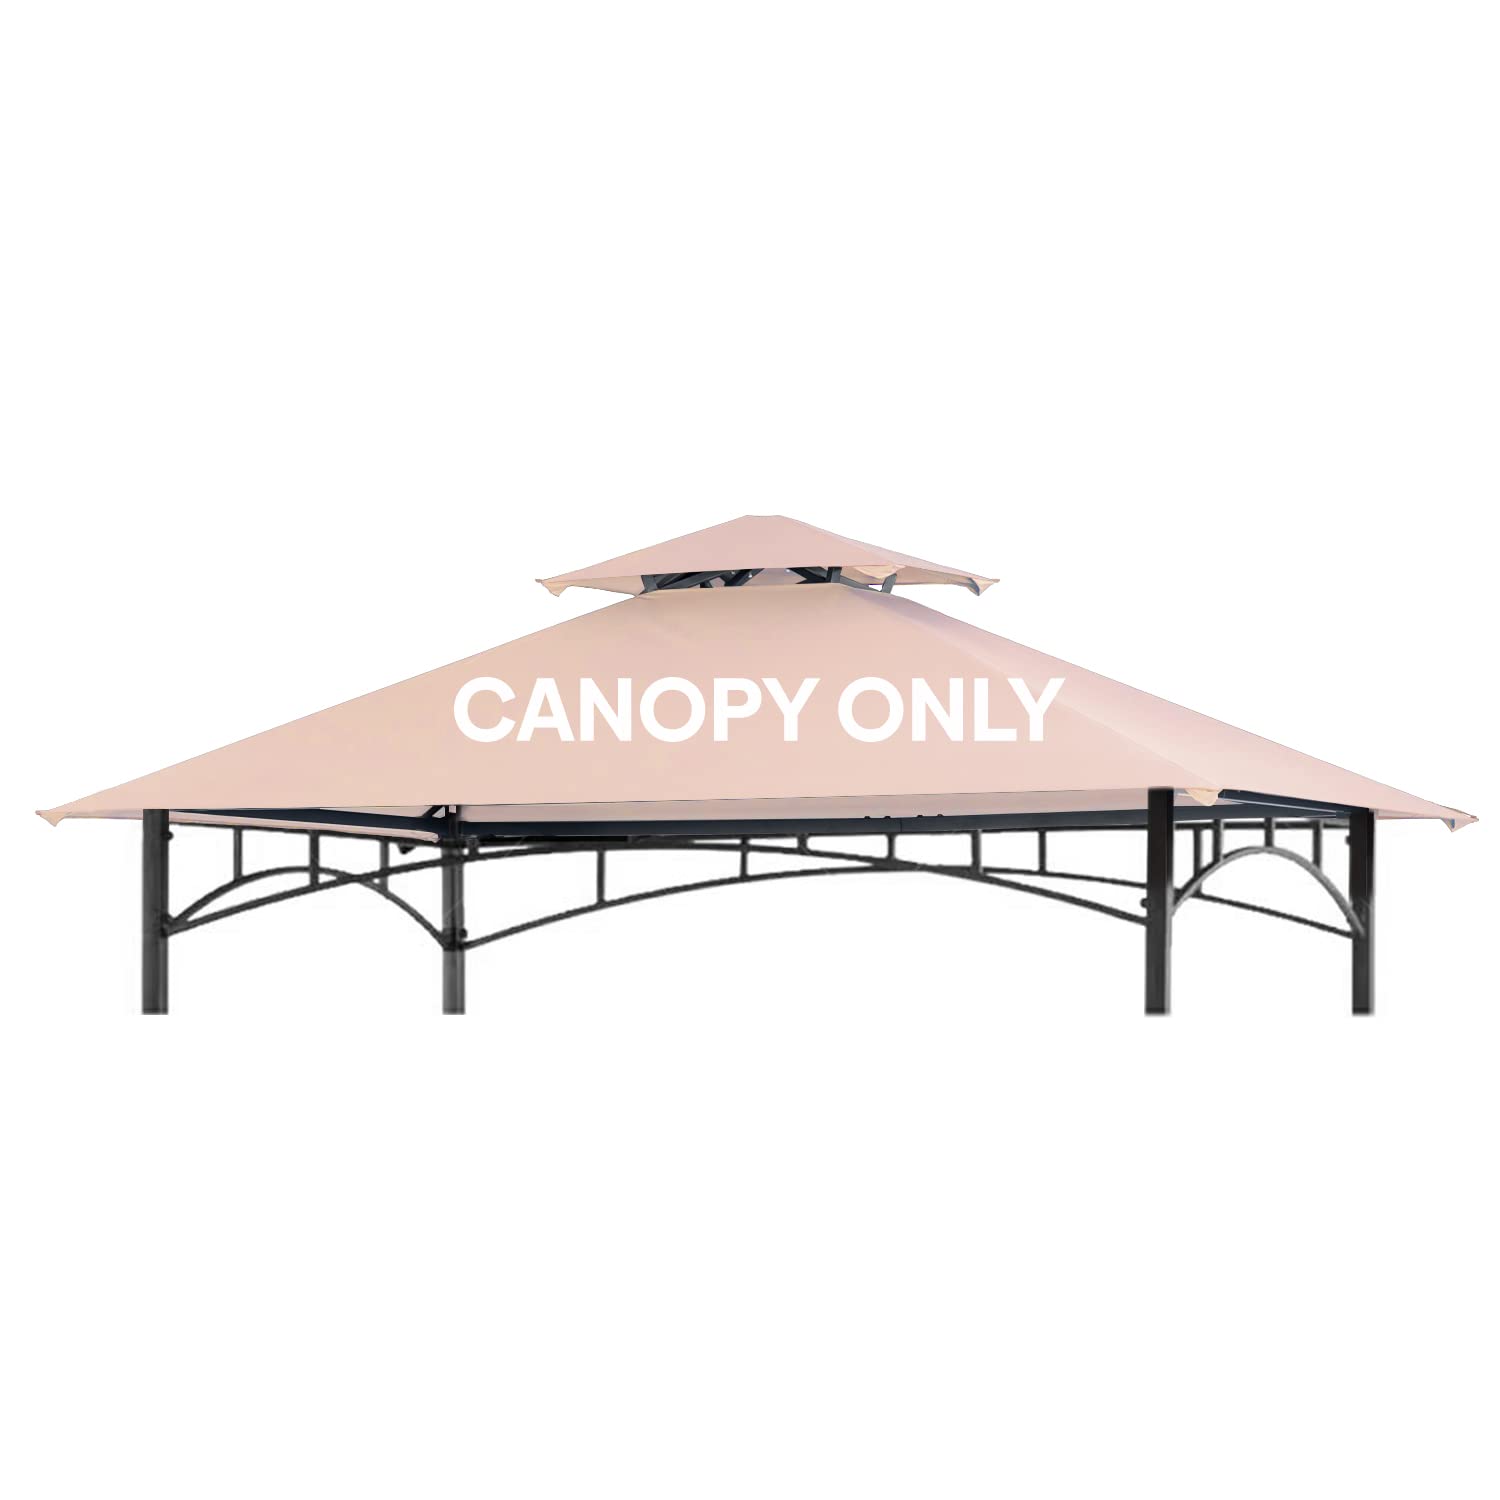 Warmally 8'x5' Grill Gazebo Canopy, Outdoor BBQ Gazebo with Hooks, Bottle Opener and 2 Led Lights, Double Tiered Patio Shelter Tent for Barbecues and Picnics (Beige, Straight Top)